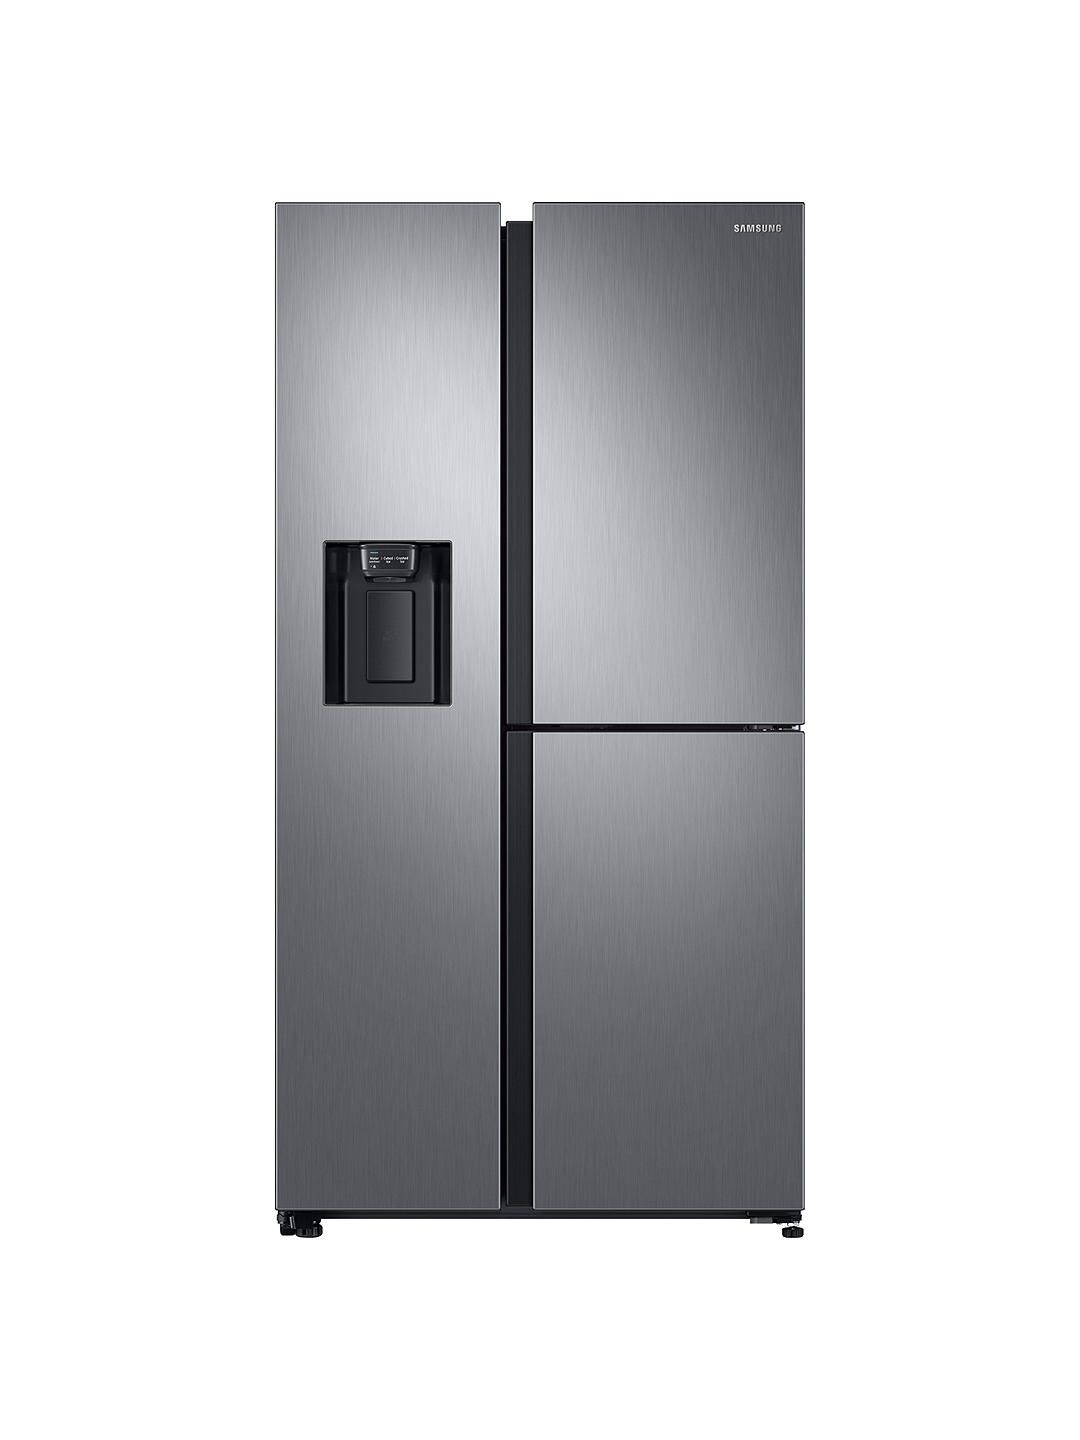 SAMSUNG RS68N8670S9 Freestanding American Style Fridge Freezer with Flexzone-Stainless Steel